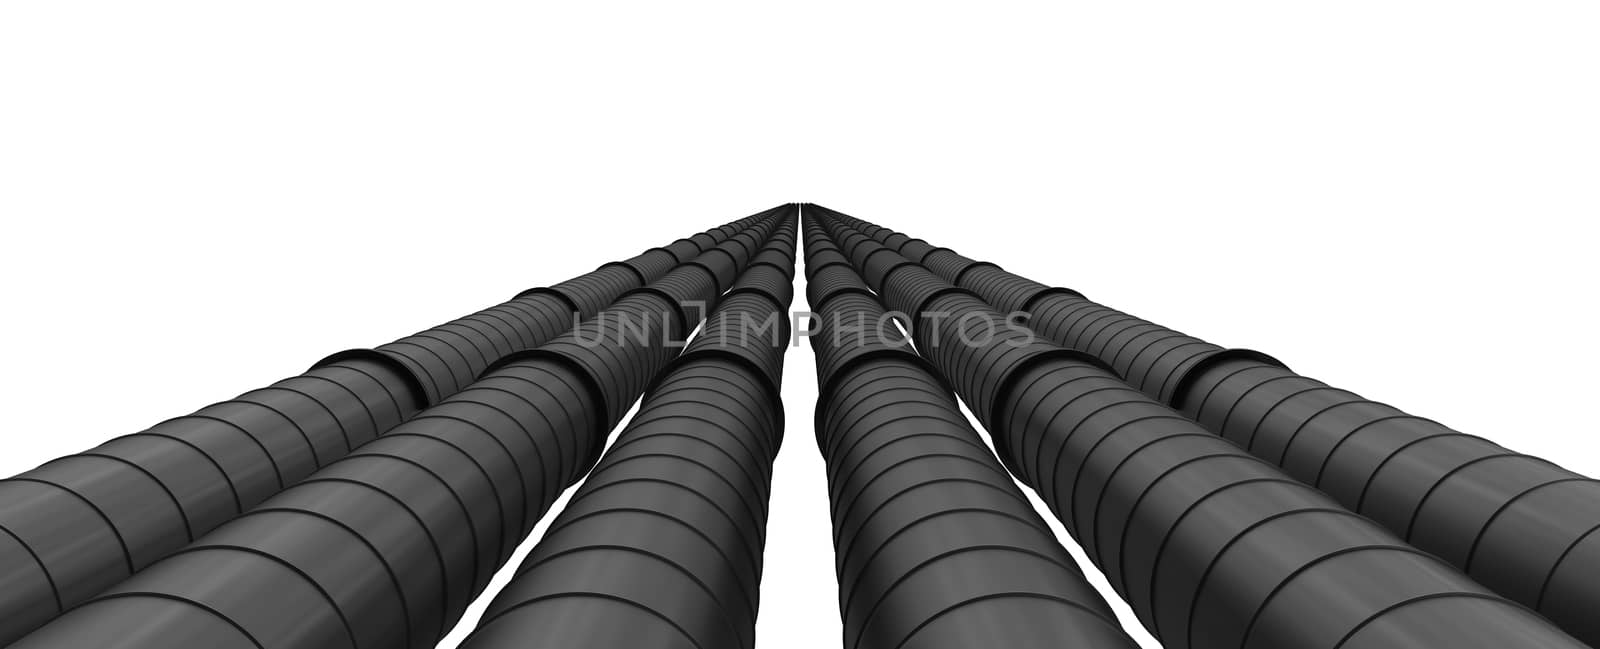 Row of black industrial pipelines isolated on white background by cherezoff